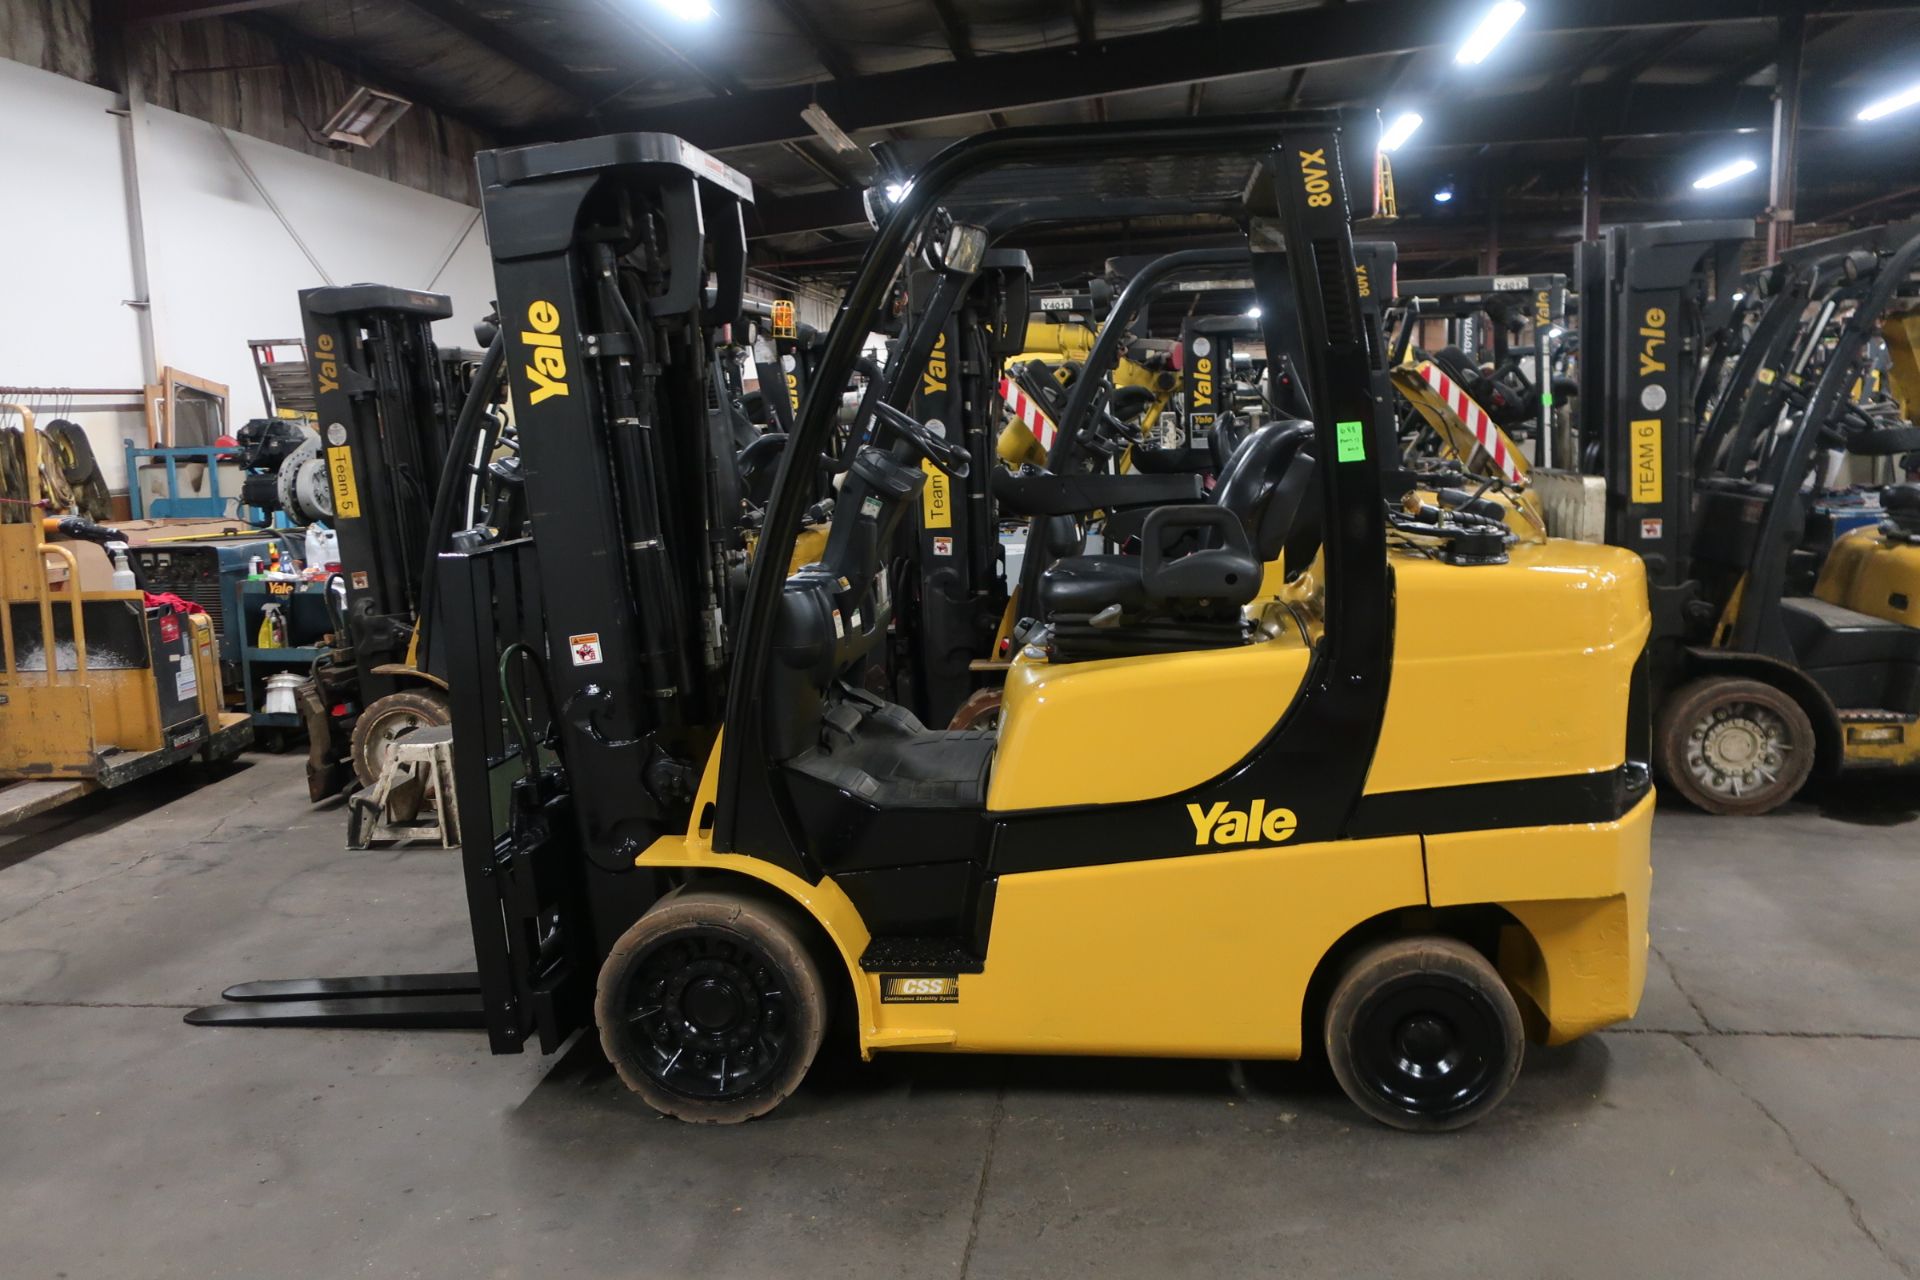 FREE CUSTOMS - 2015 Yale 7000lbs Capacity Forklift with 3-stage mast - LPG (propane) (no propane